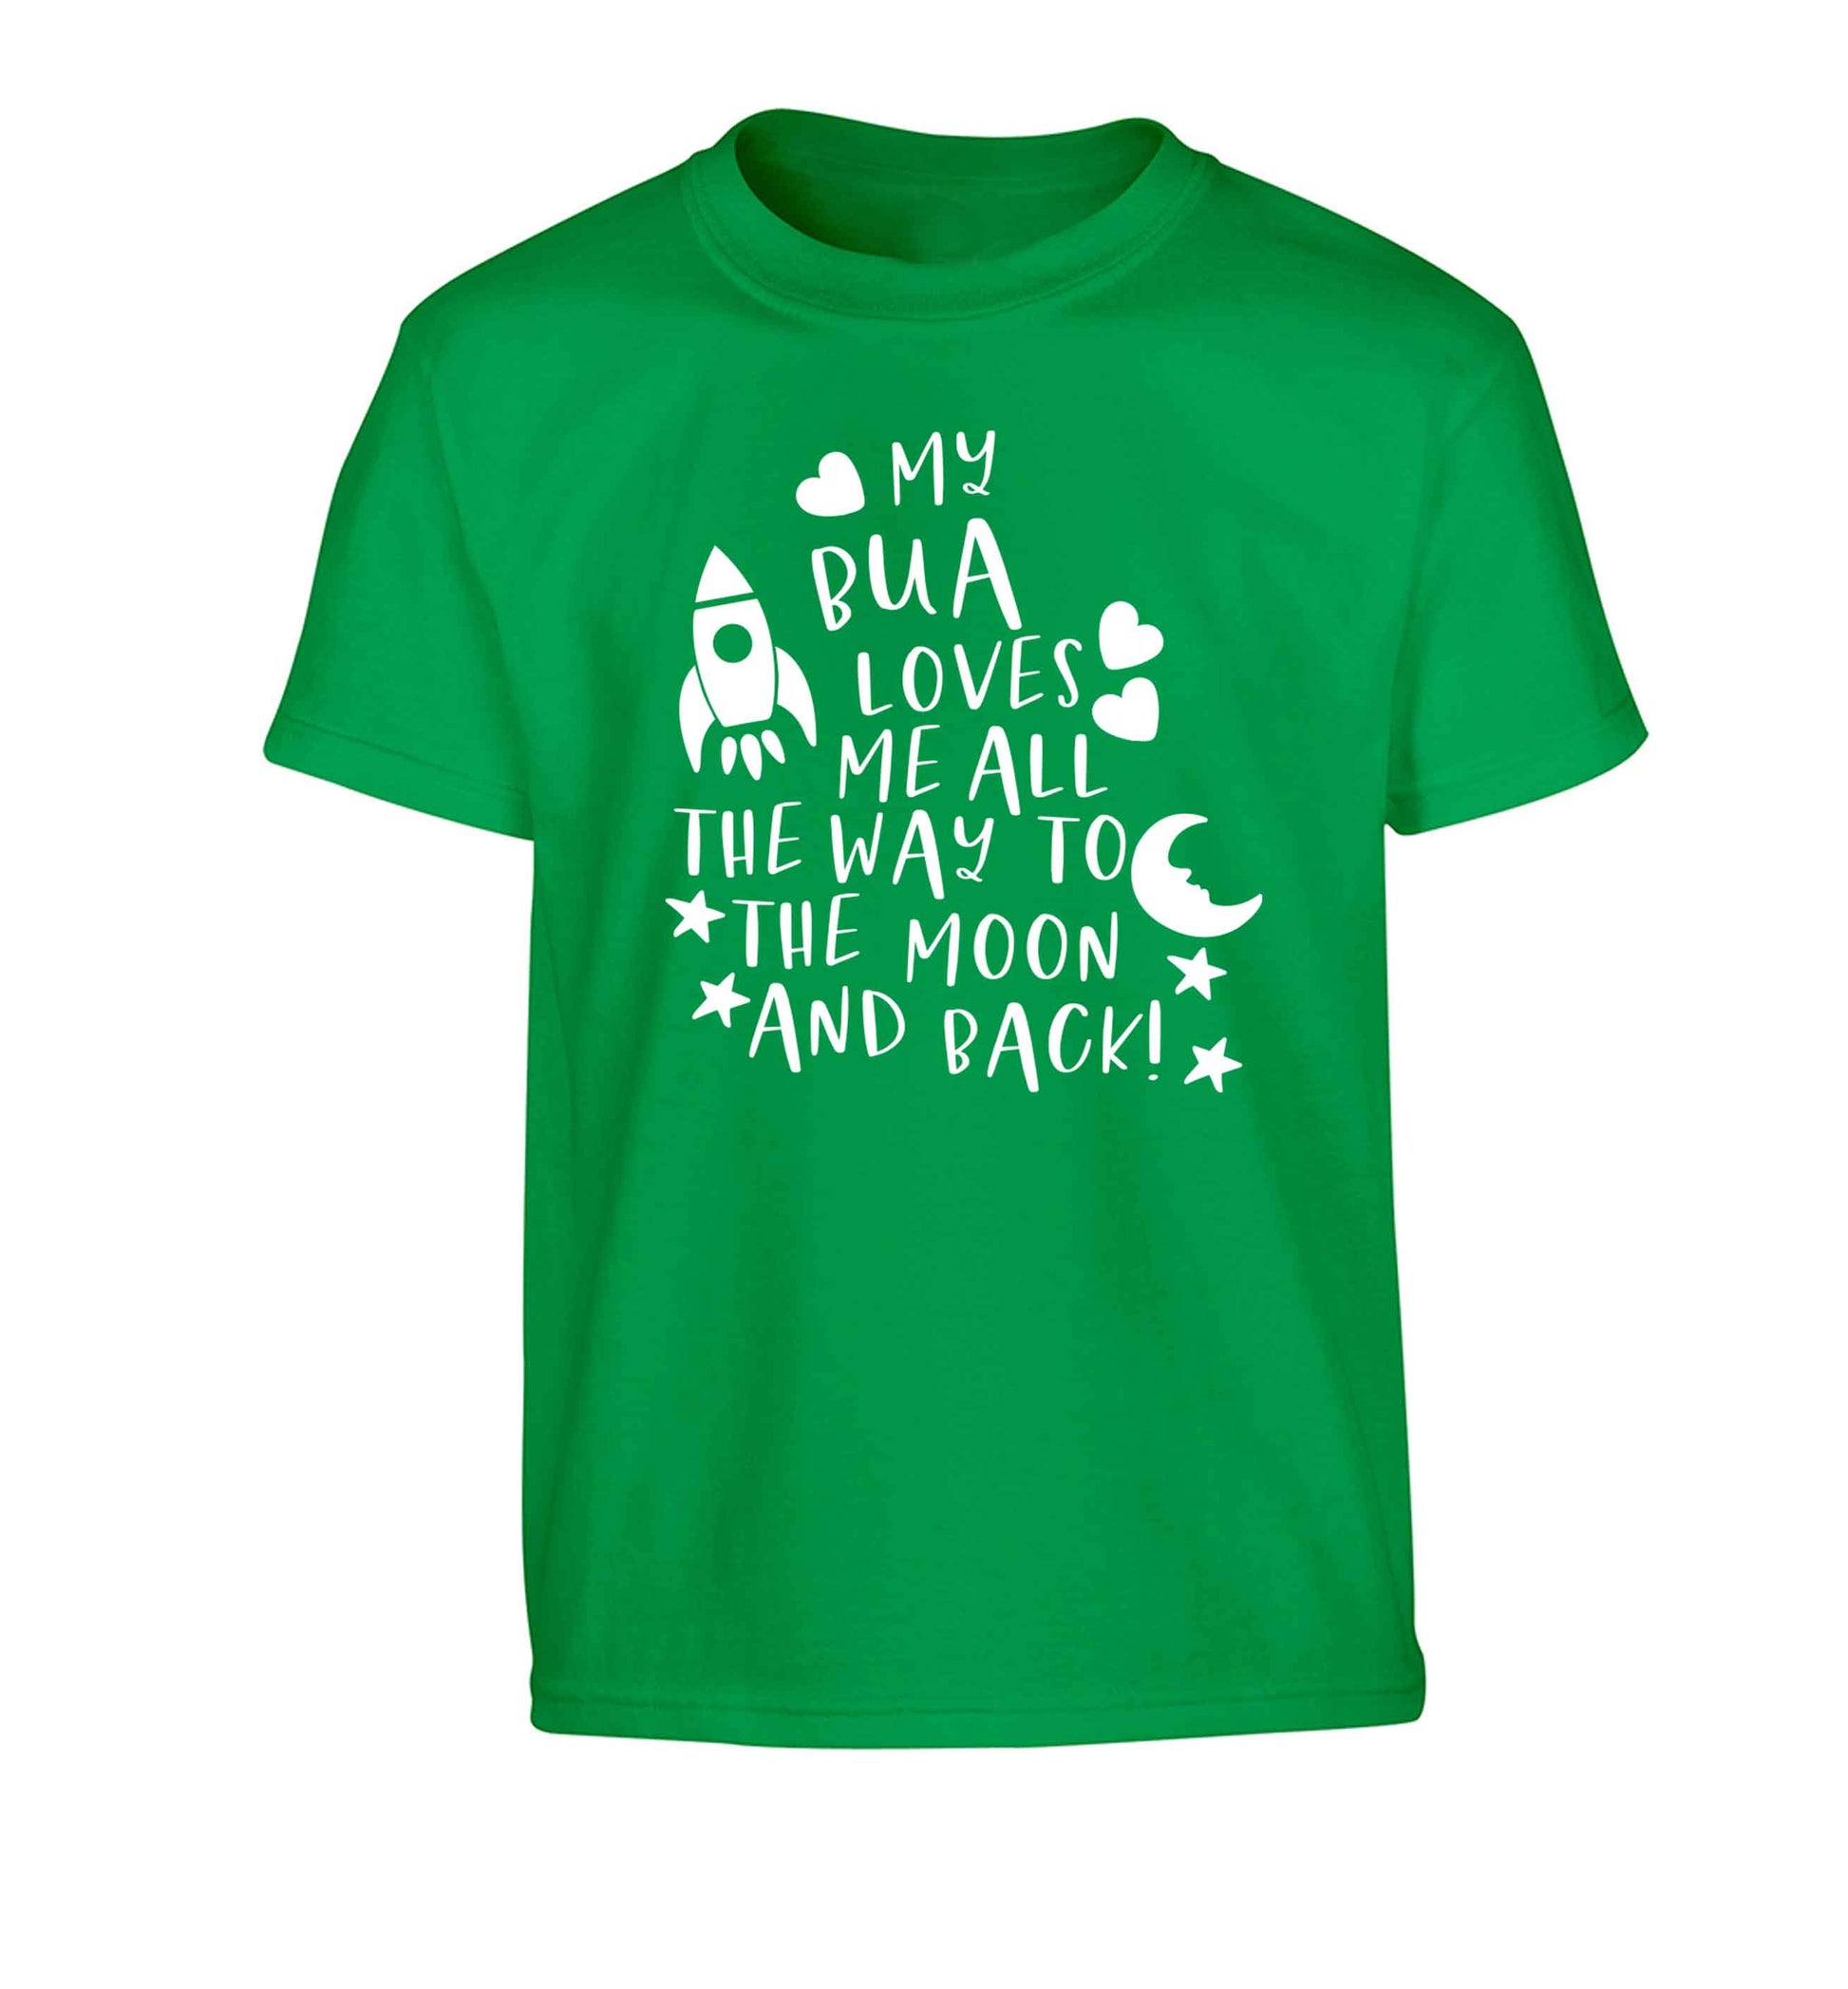 My bua loves me all they way to the moon and back Children's green Tshirt 12-13 Years